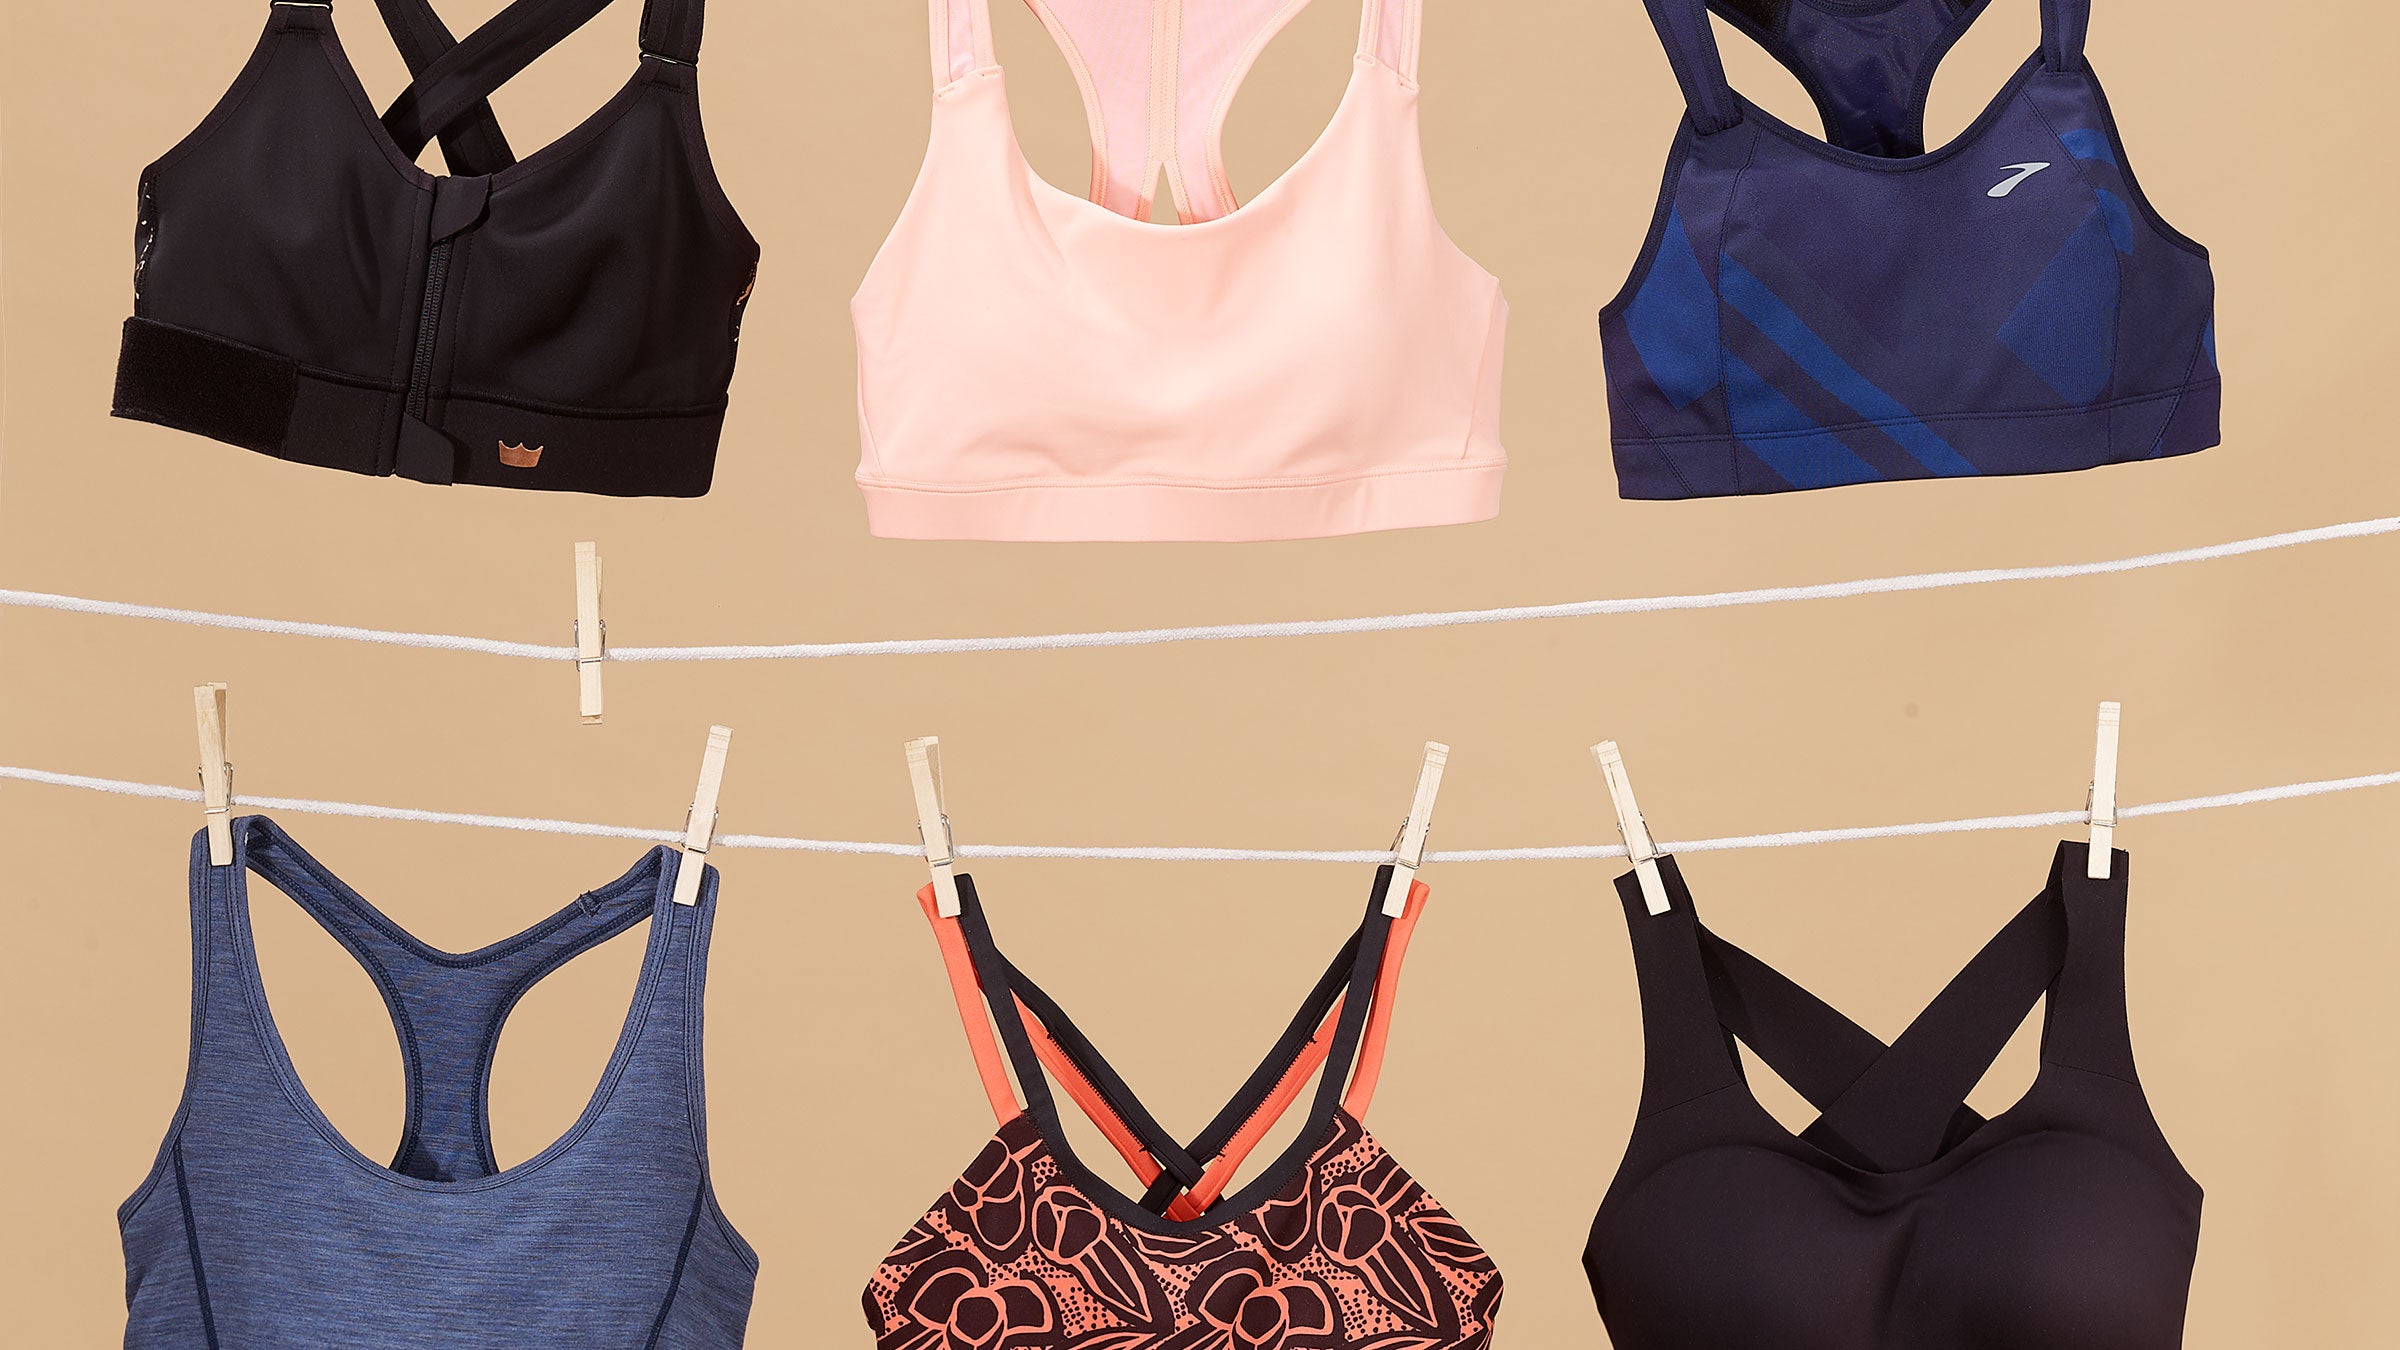 6 Sports Bras We Love for Every Activity and Body Type